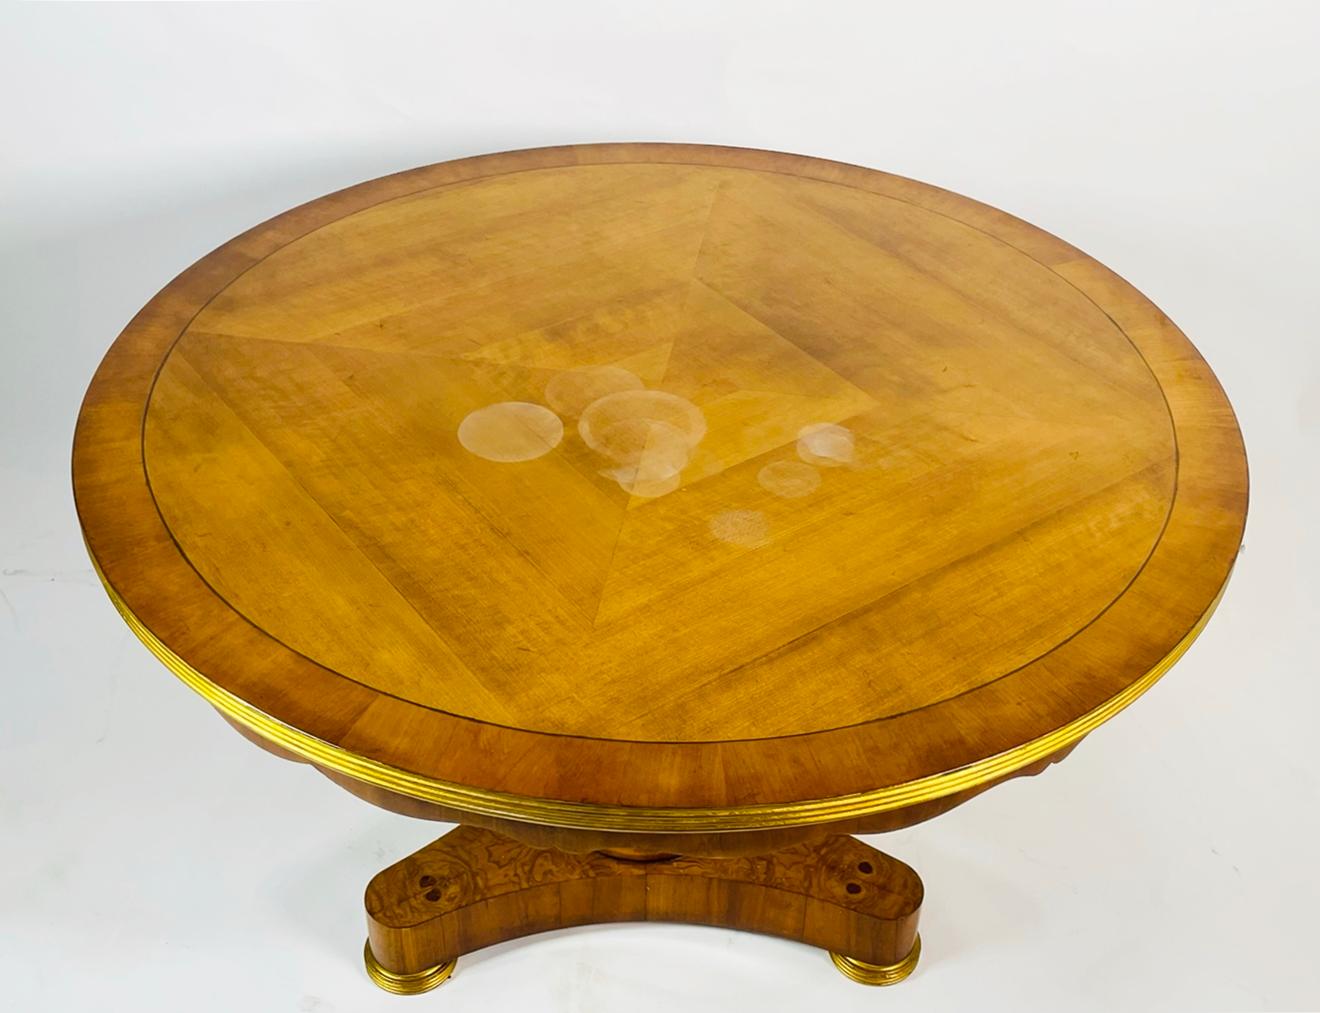 Spanish Charles Pollock for William Switzer Giltwood Center /Dining Table For Sale